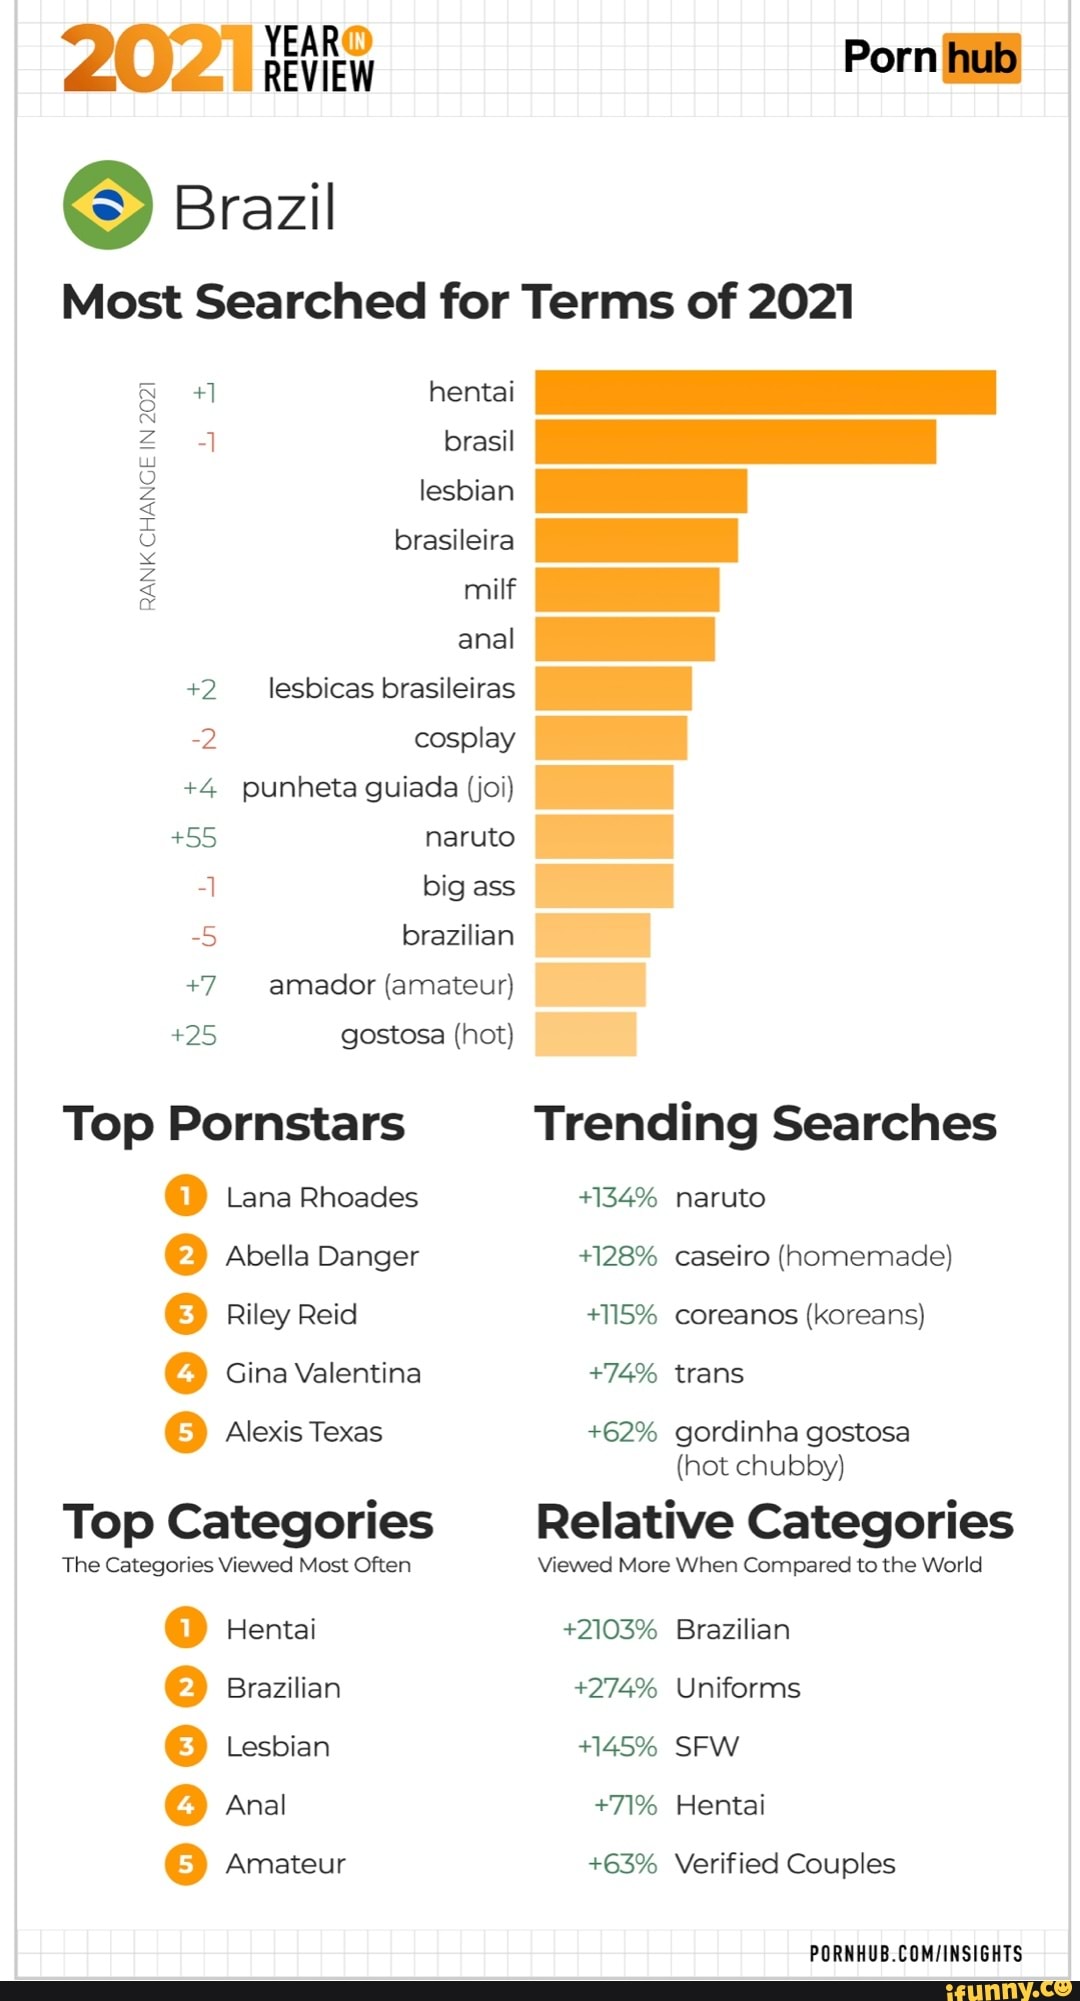 Brazil Hentai Porn - Porn hub Most Searched for Terms of 2021 hentai brasil lesbian brasileira  milf RANK CHANGE IN